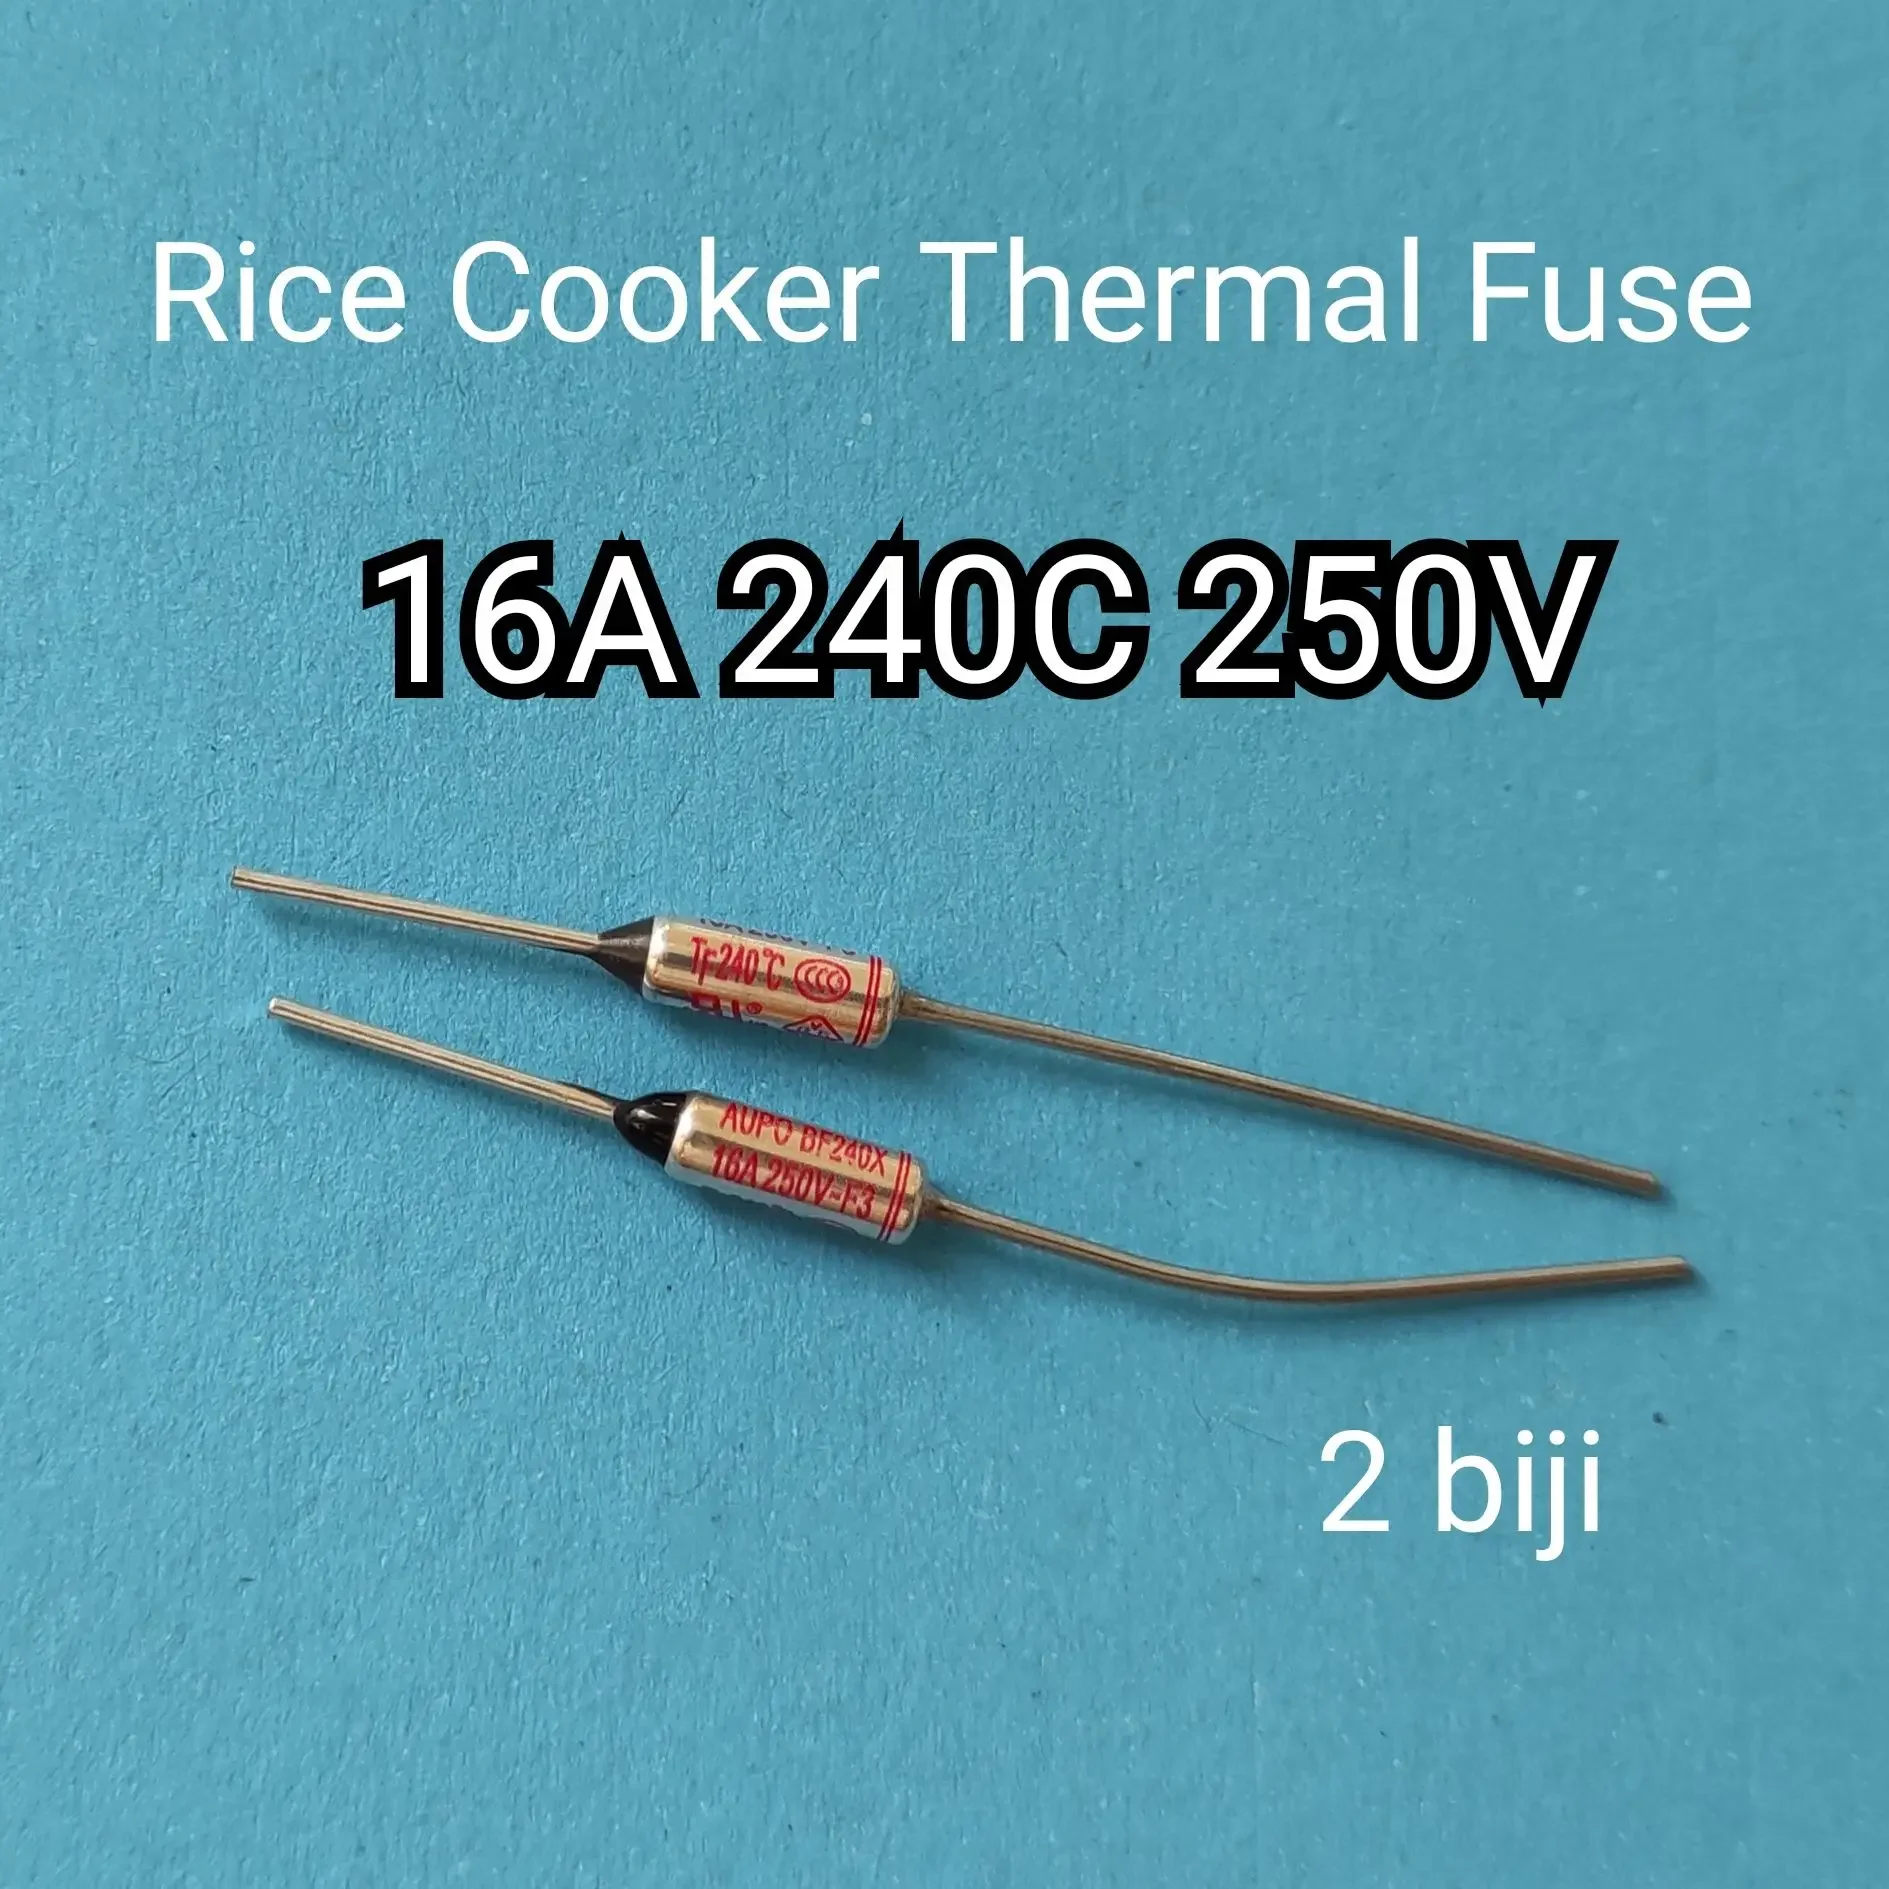 2 Biji 16A 240C 250V Rice Cooker Thermal Fuse thermo fuse fius periuk nasi air fryer